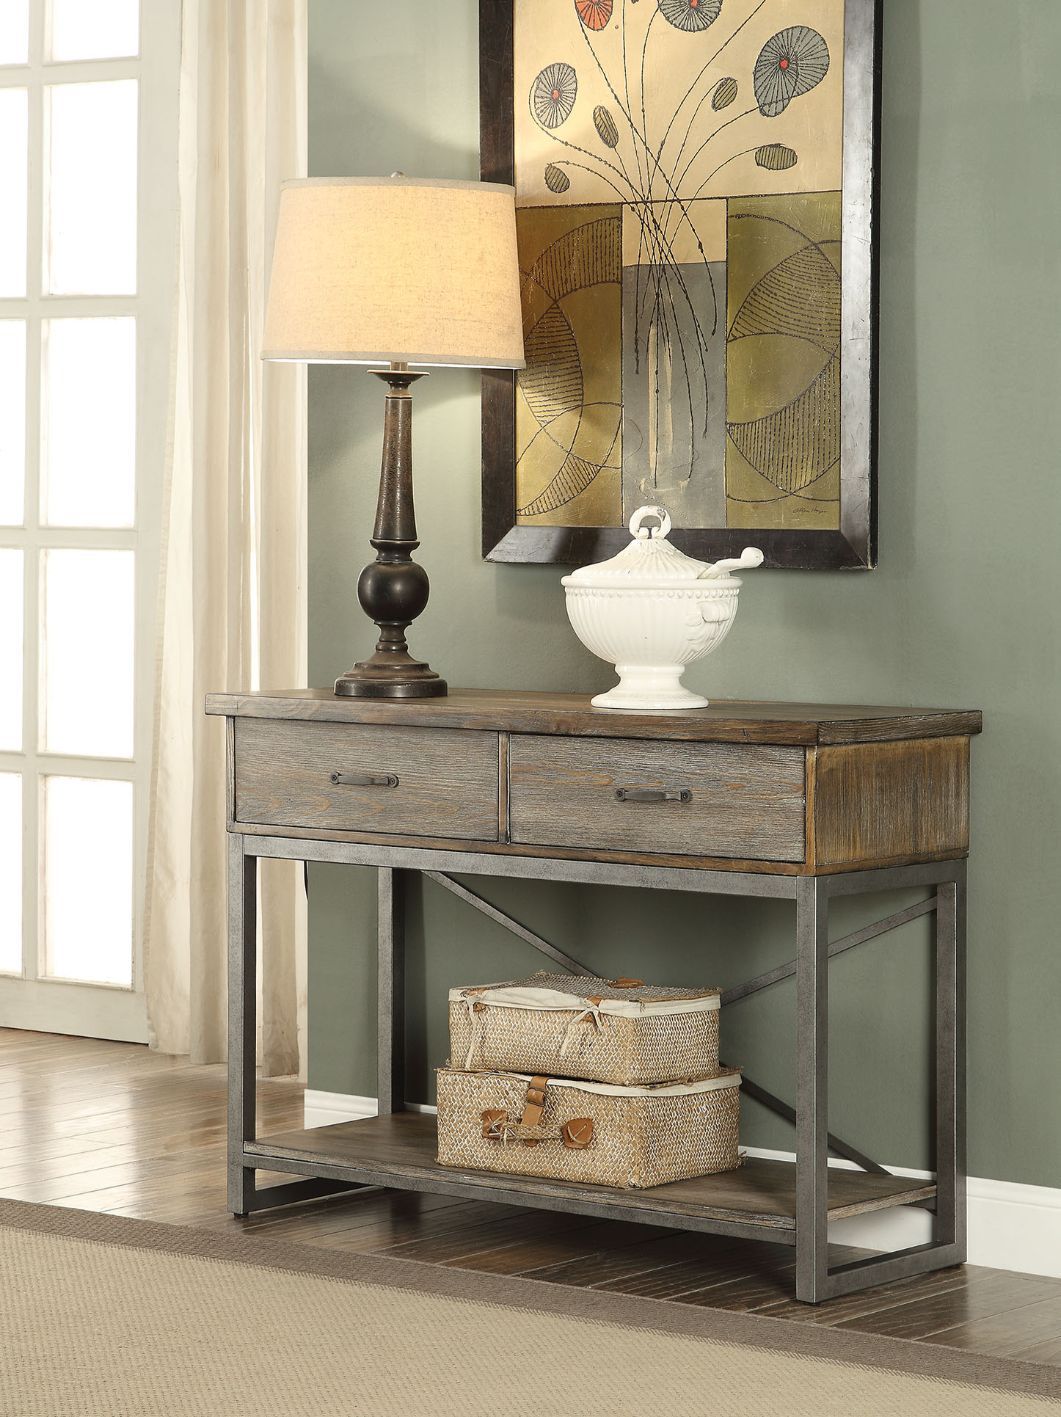 Lazarus - Server - Weathered Oak & Antique Silver - Tony's Home Furnishings